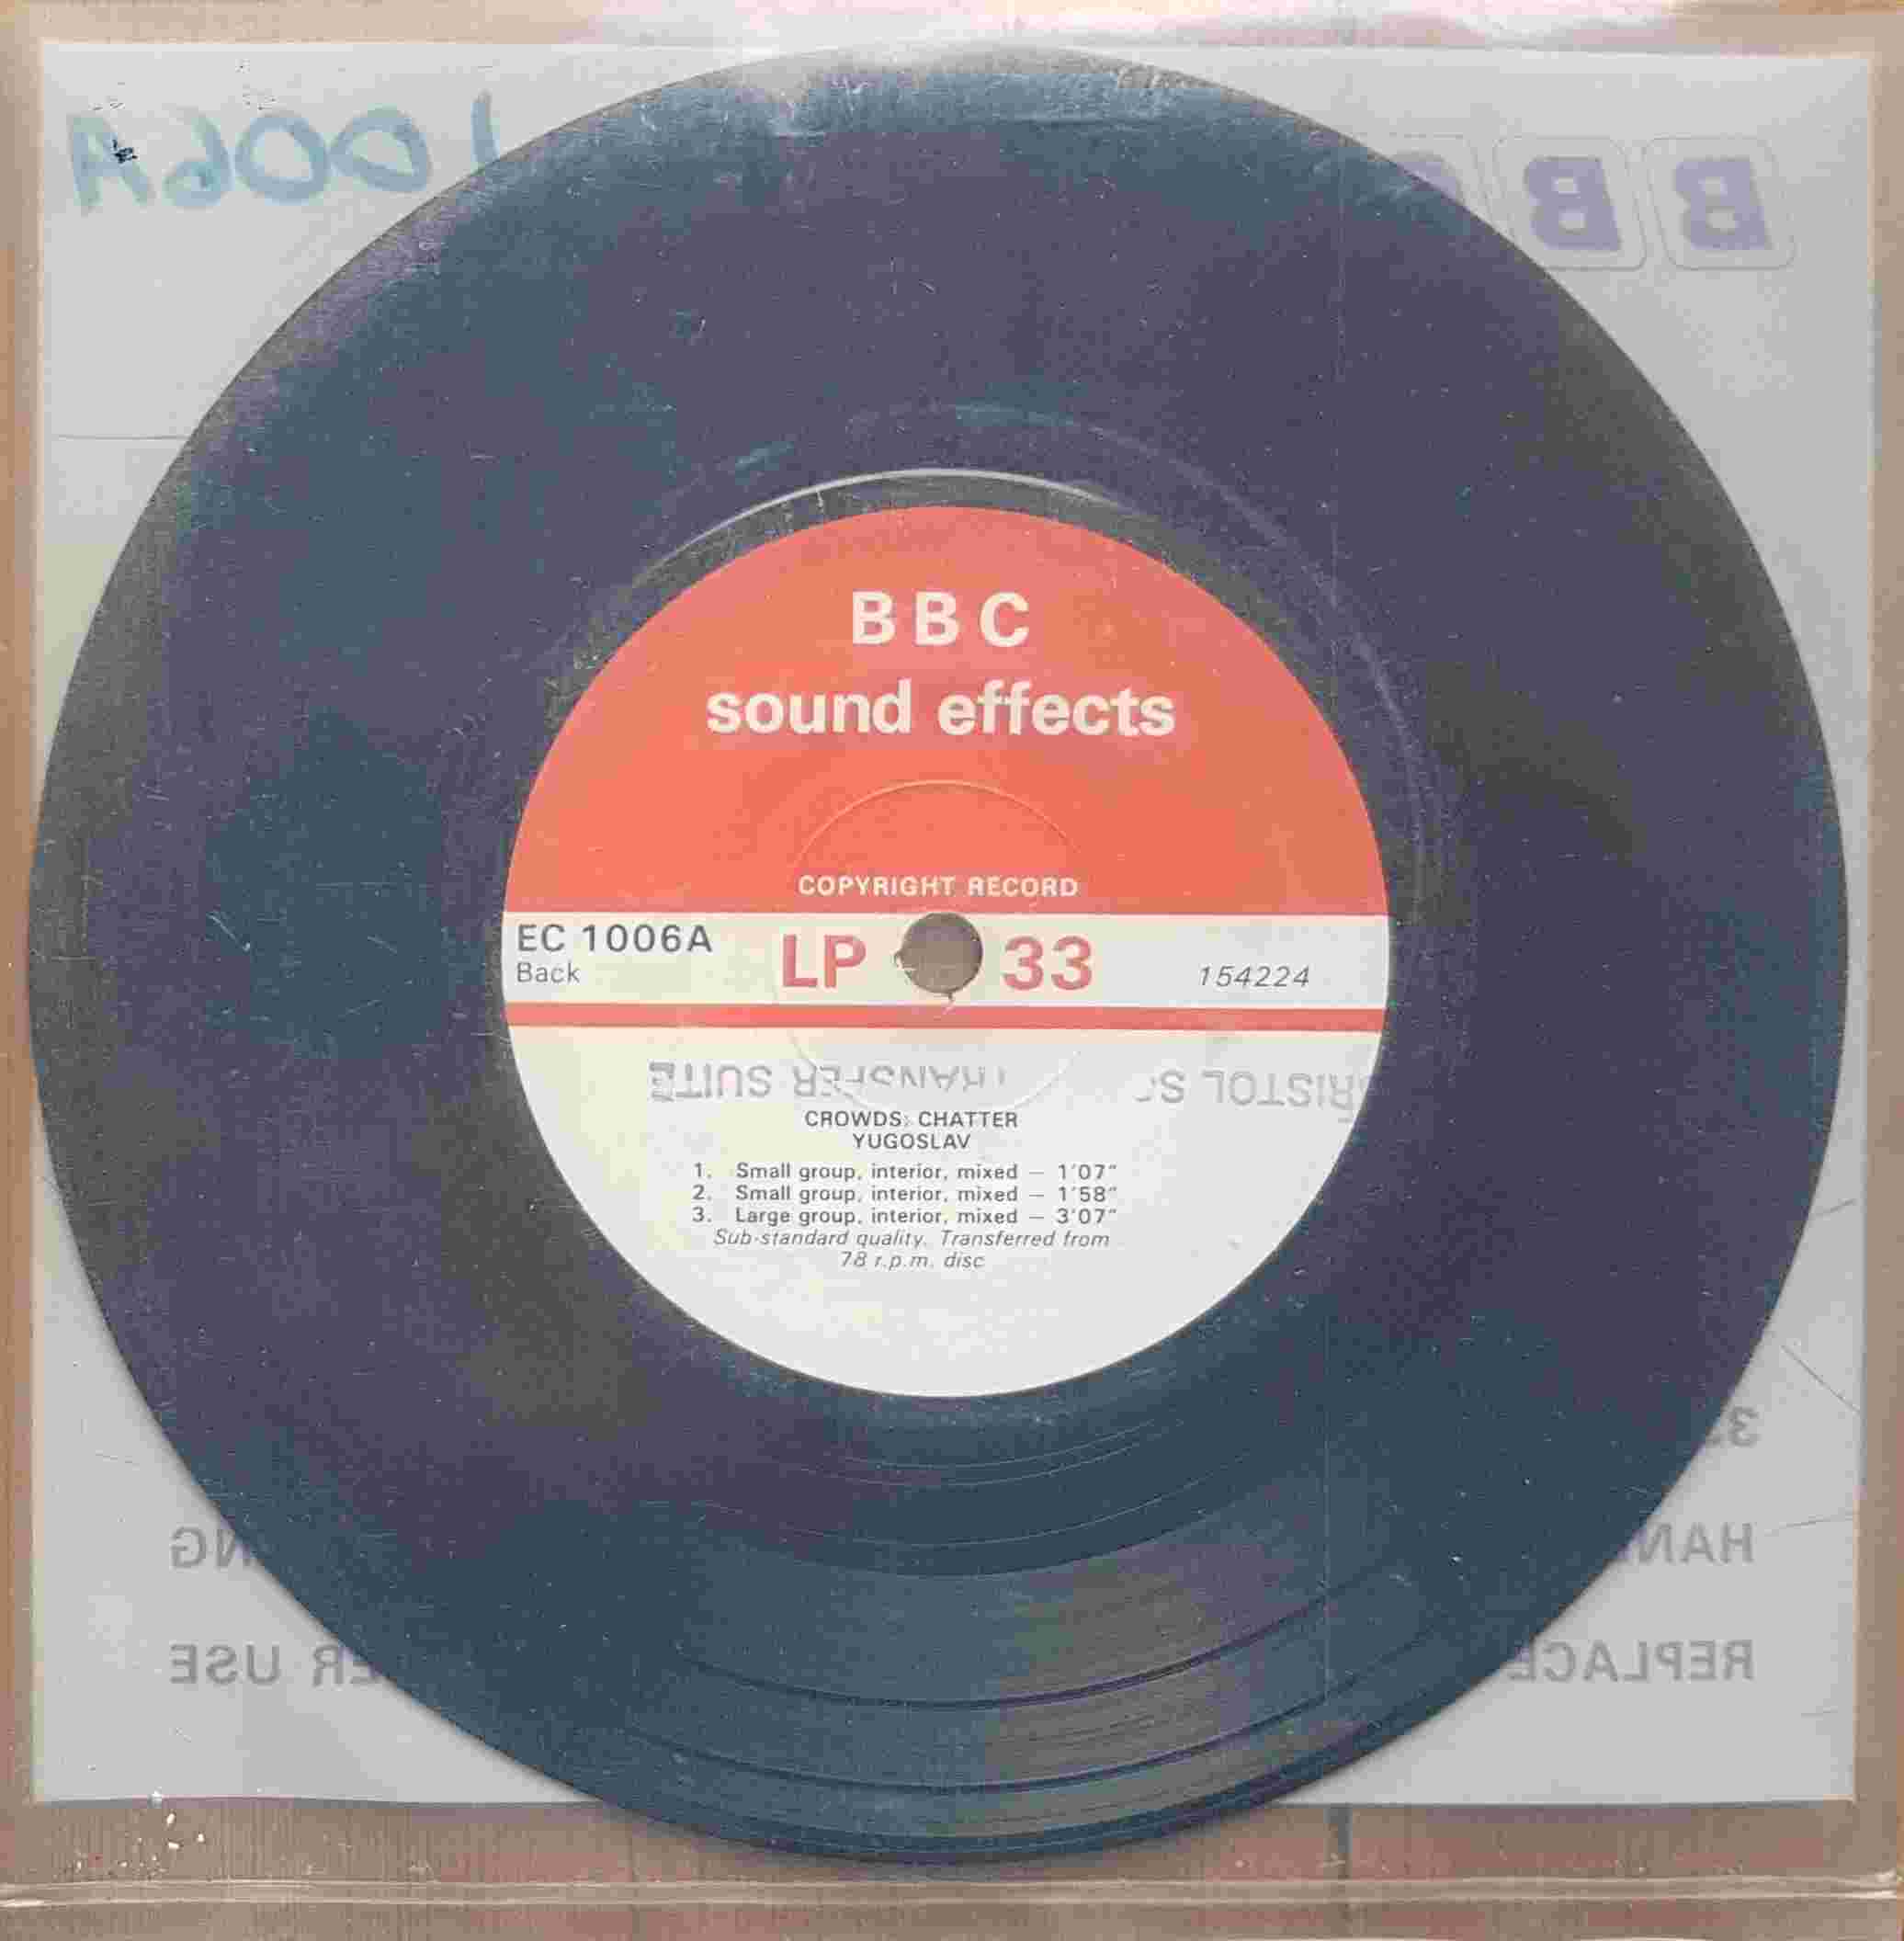 Picture of EC 1006A Crowds: Chatter by artist Not registered from the BBC records and Tapes library